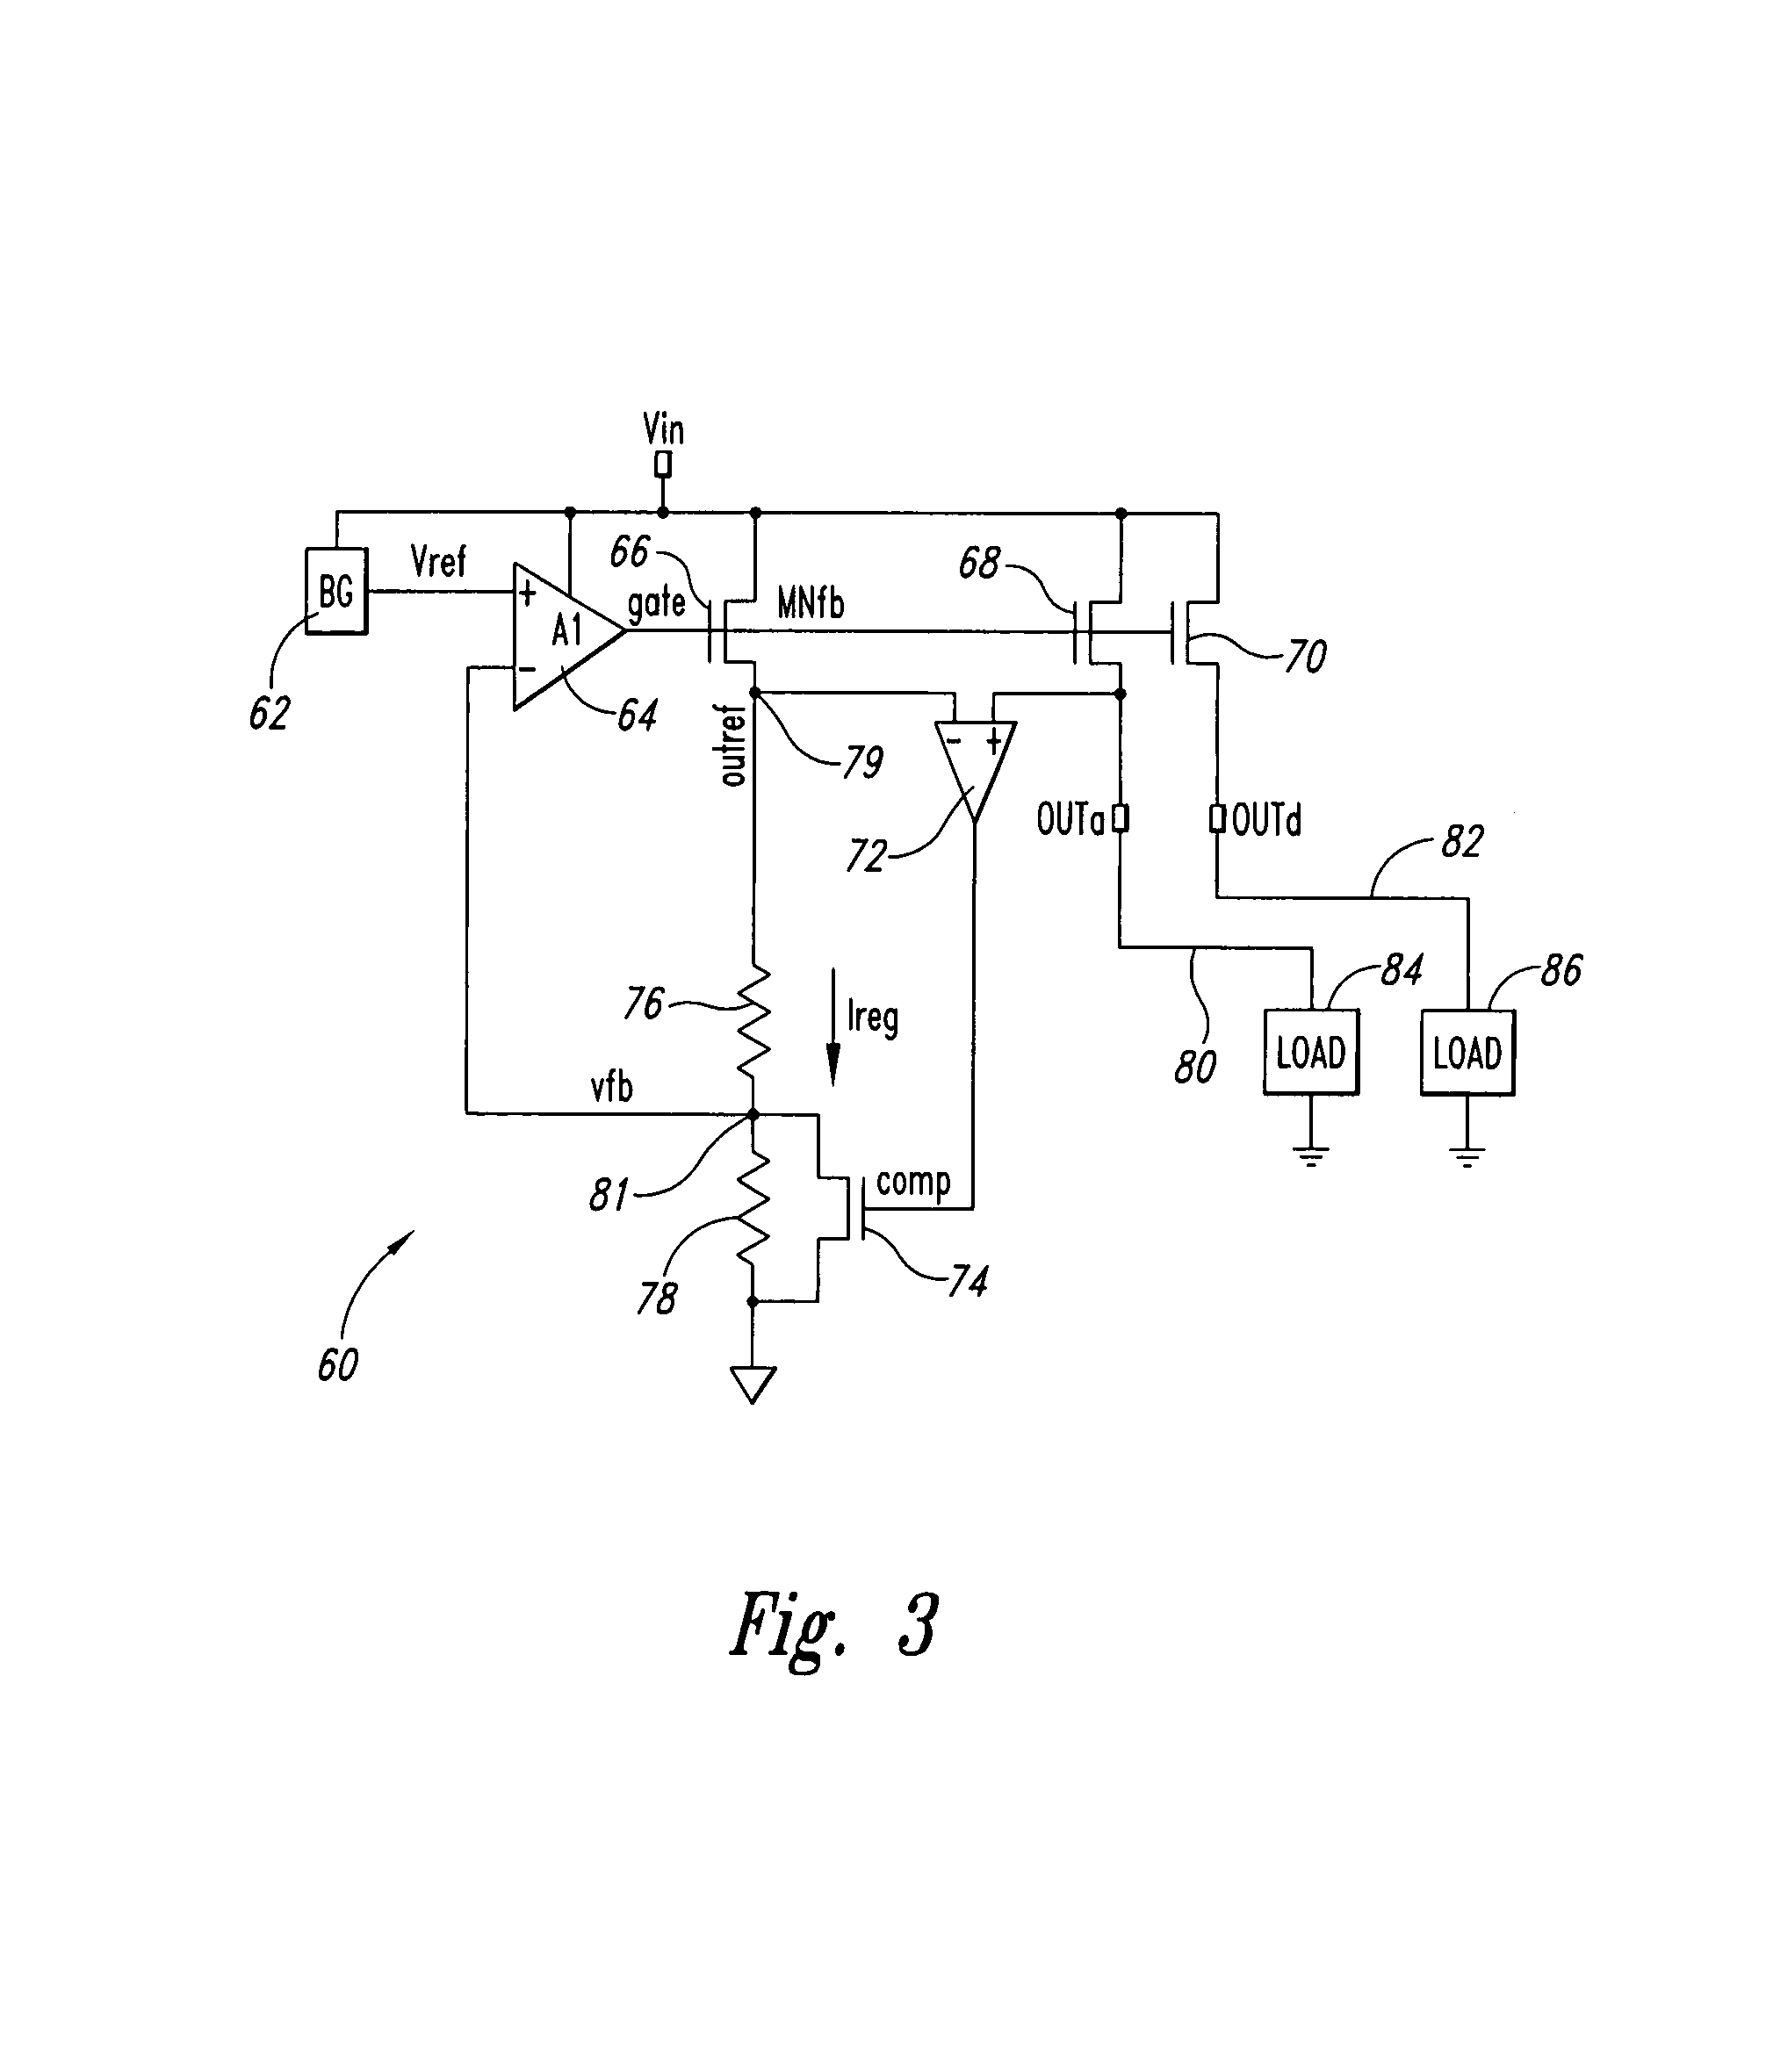 Replica regulator with continuous output correction